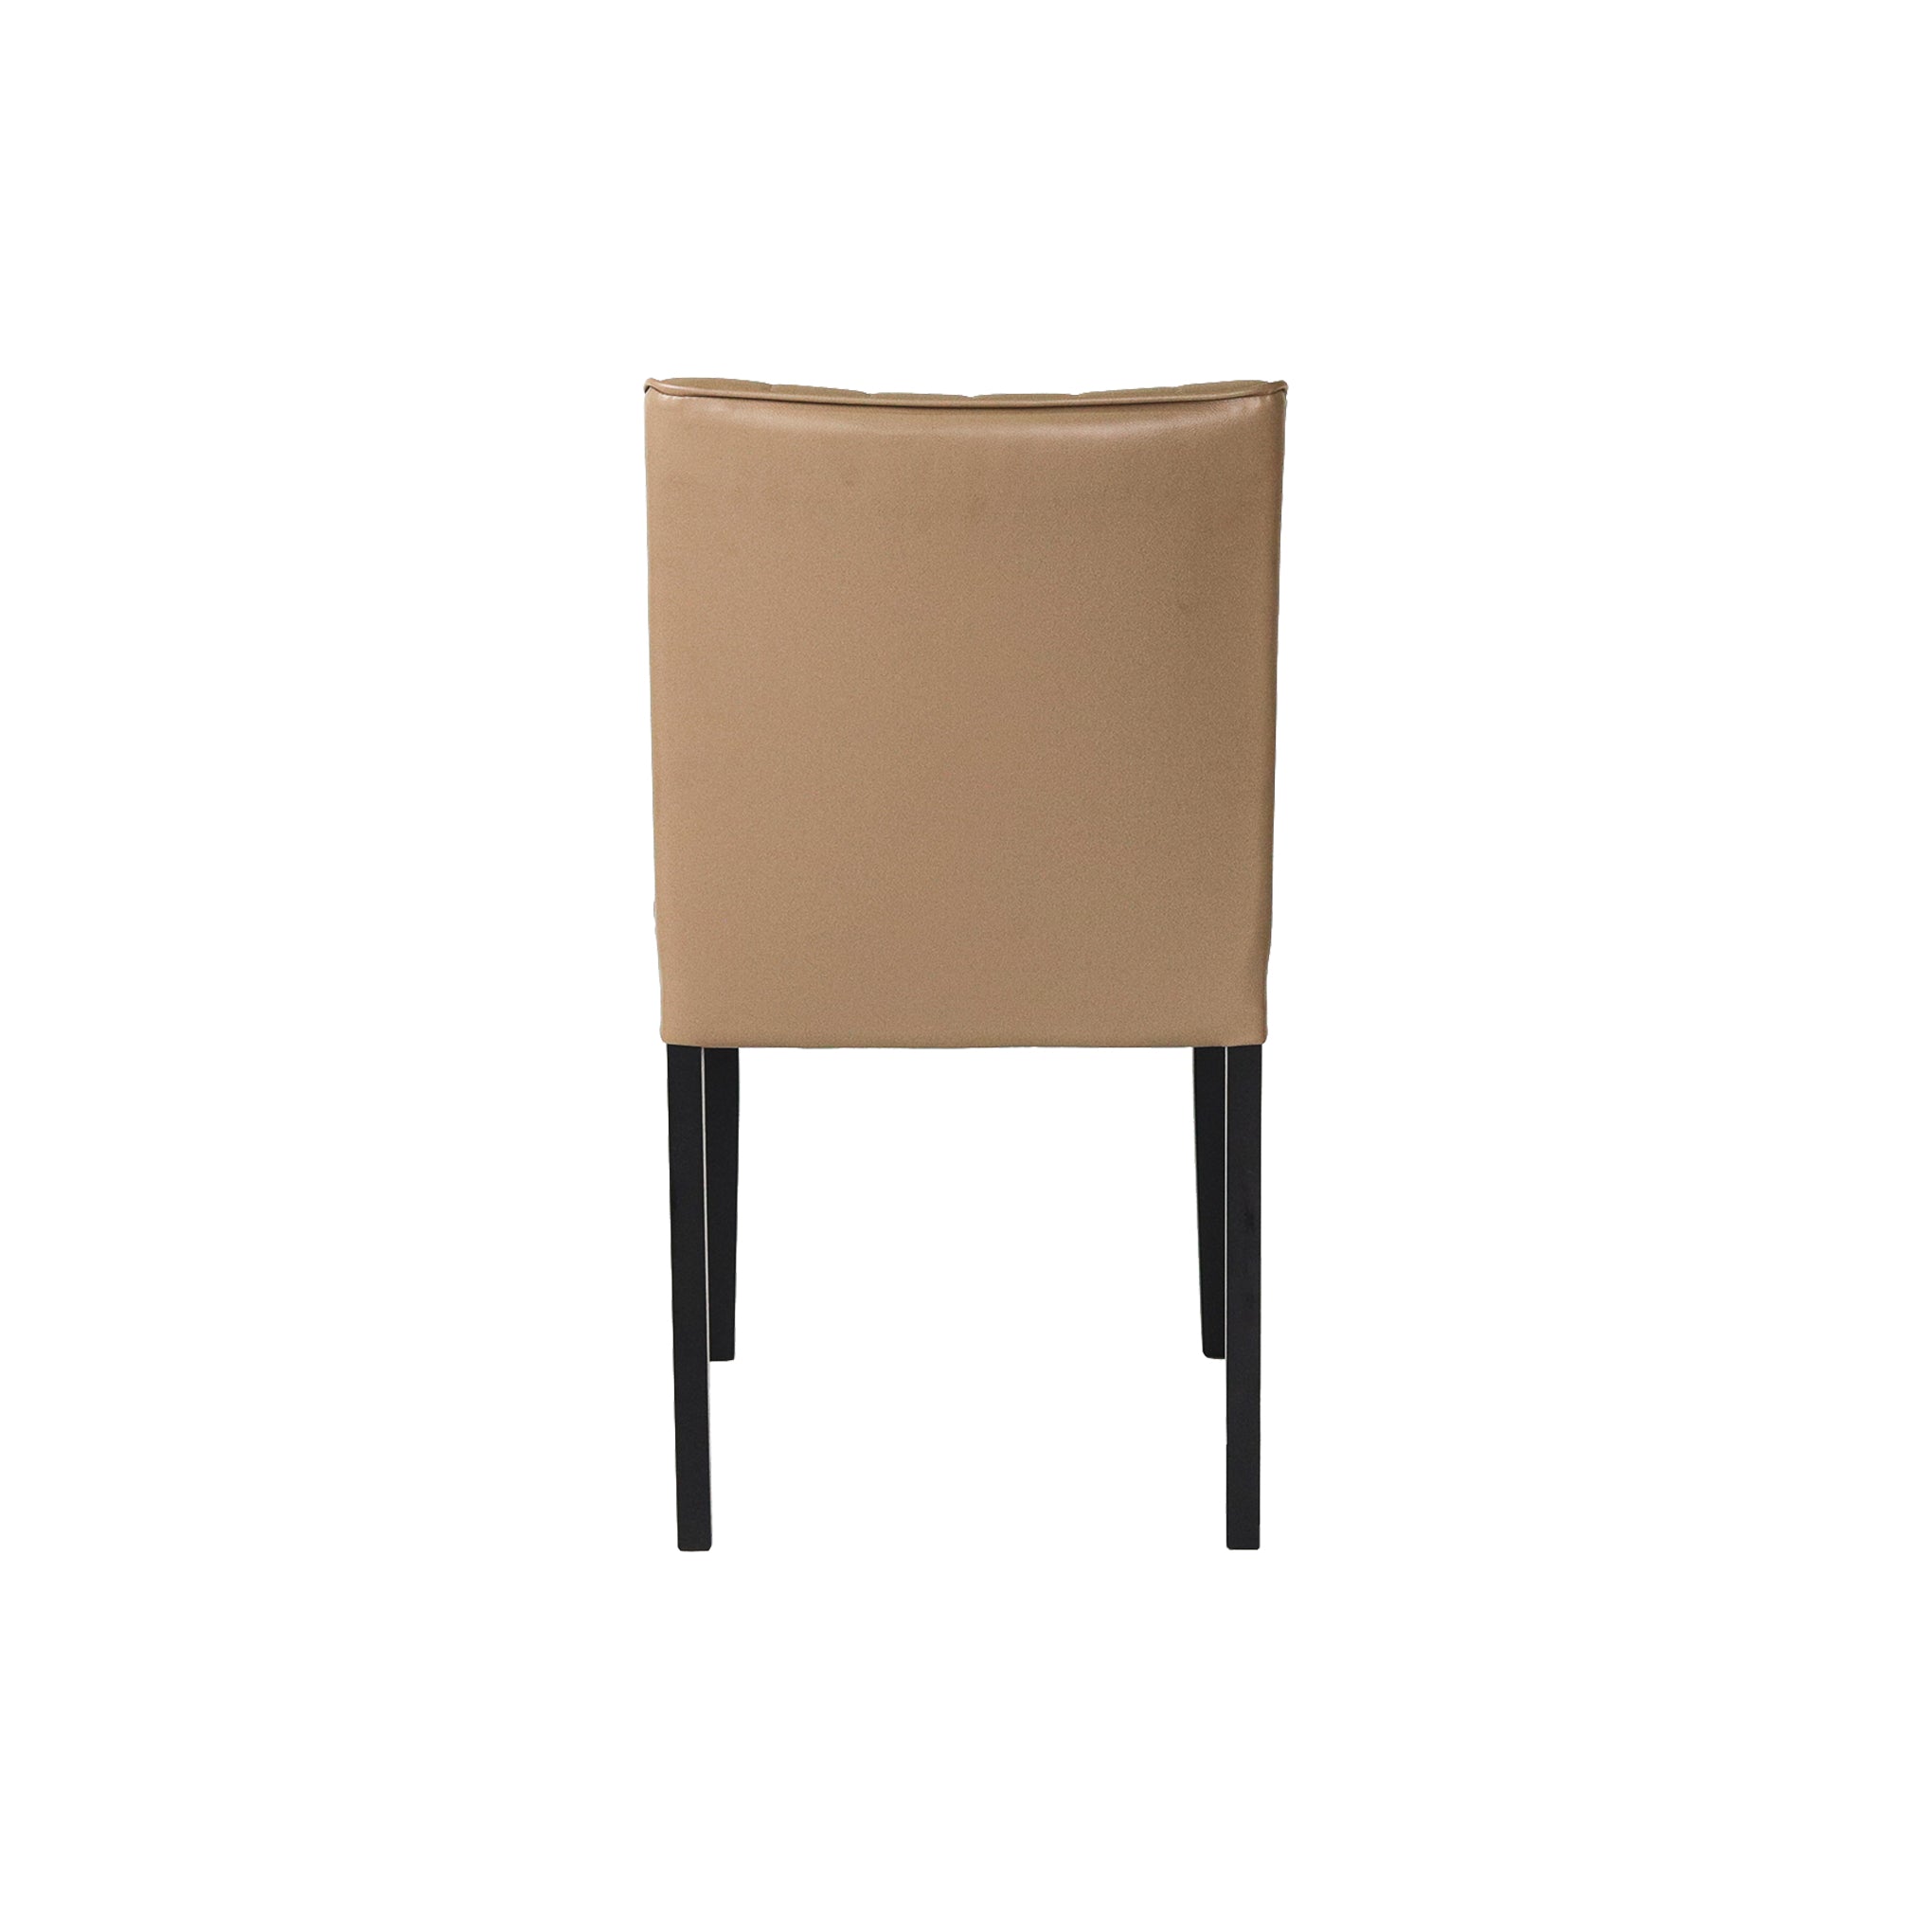 Melachi Wooden Dining Chair with PVC Seat